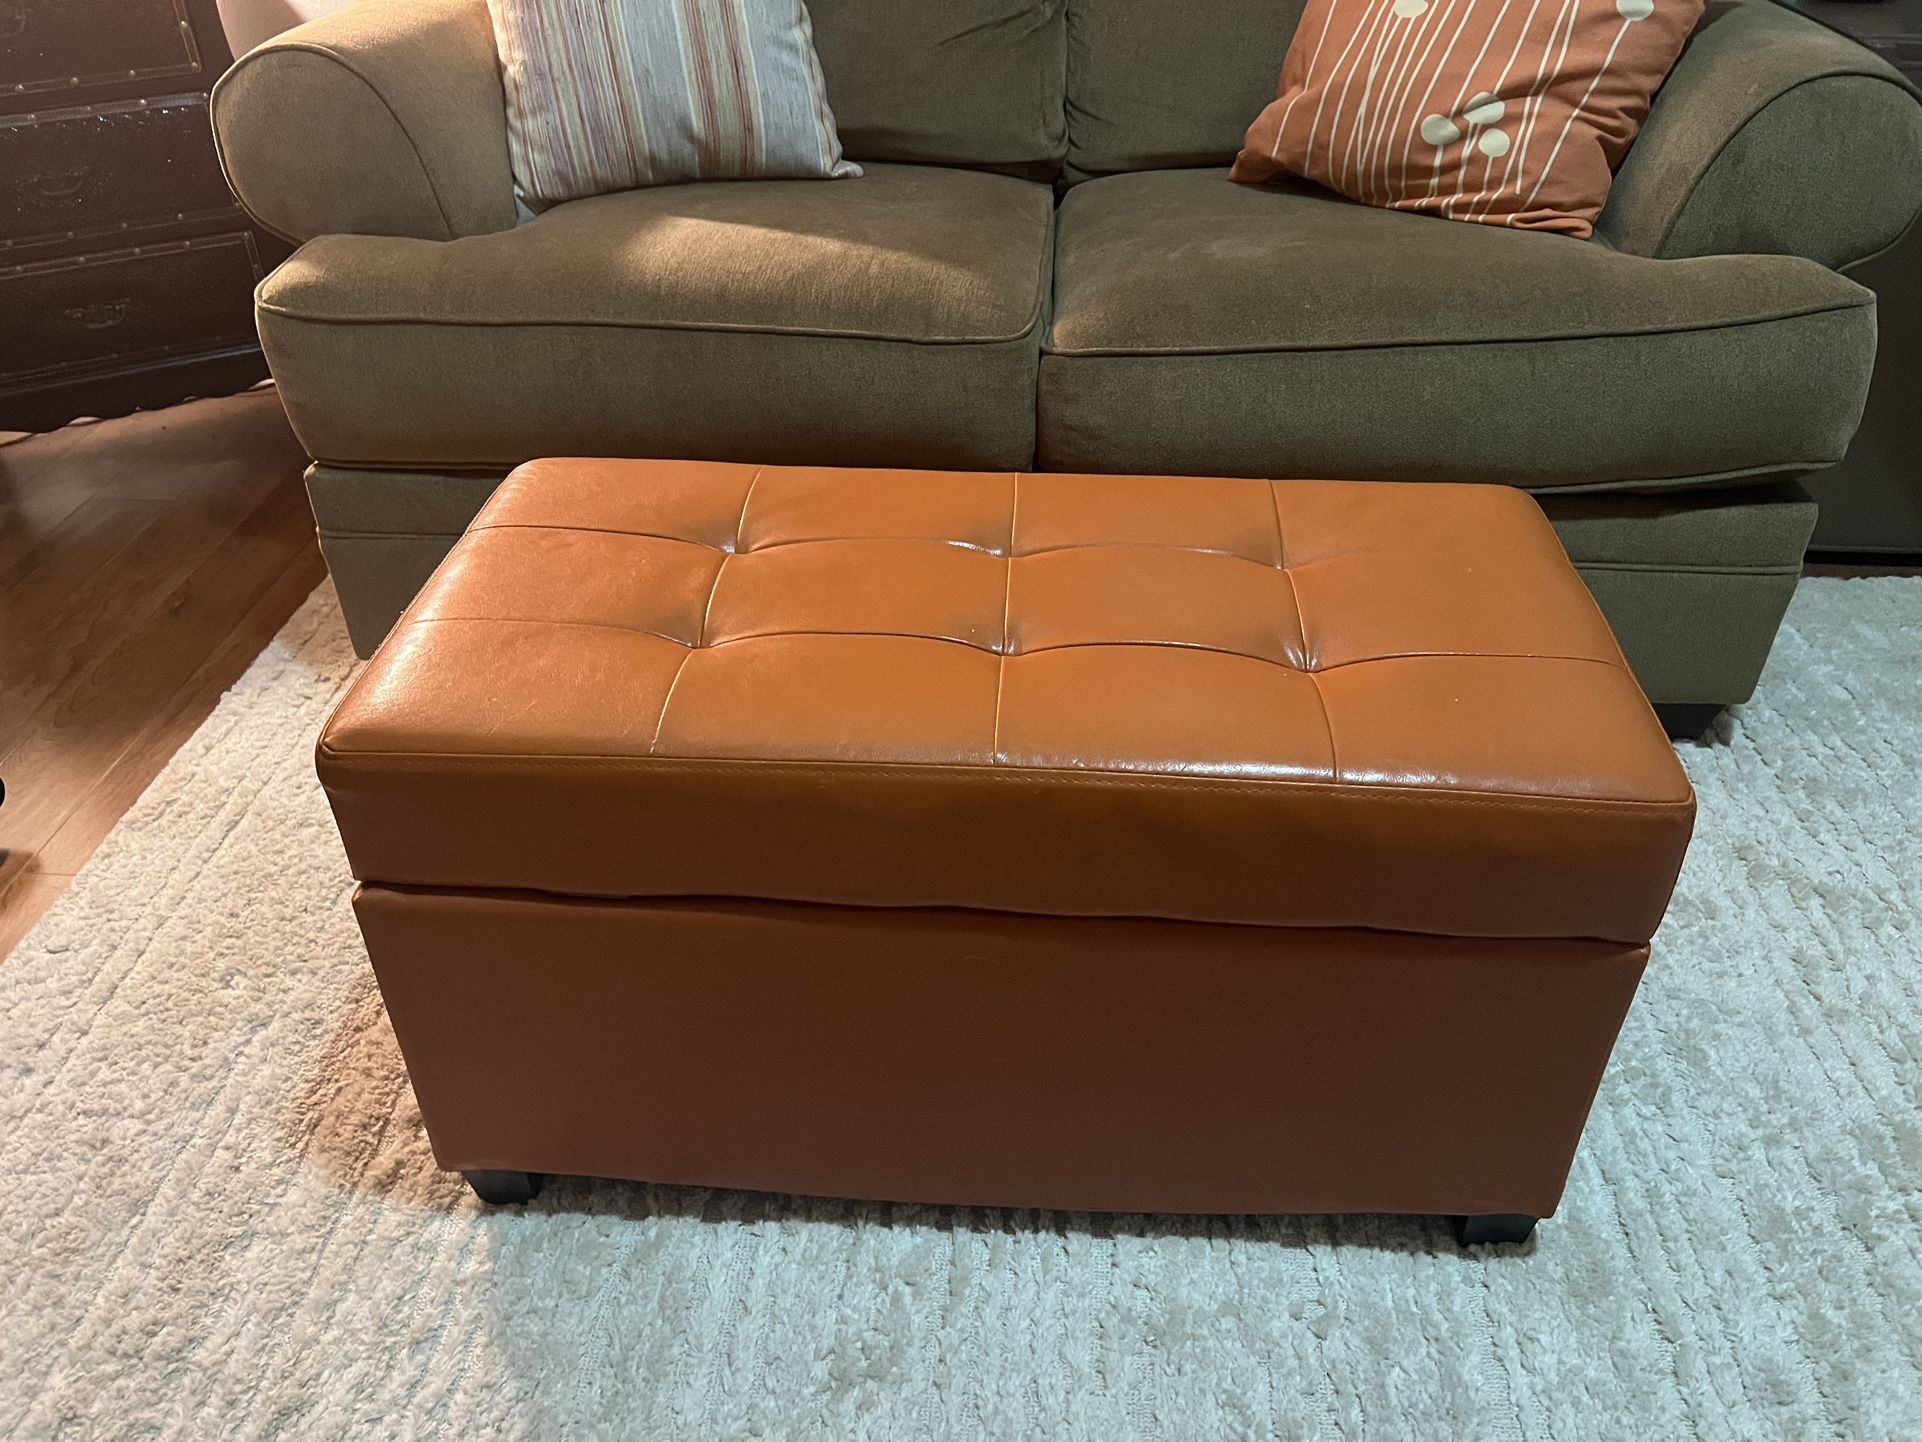 Loveseat Small Couch, End Table, Ottoman 